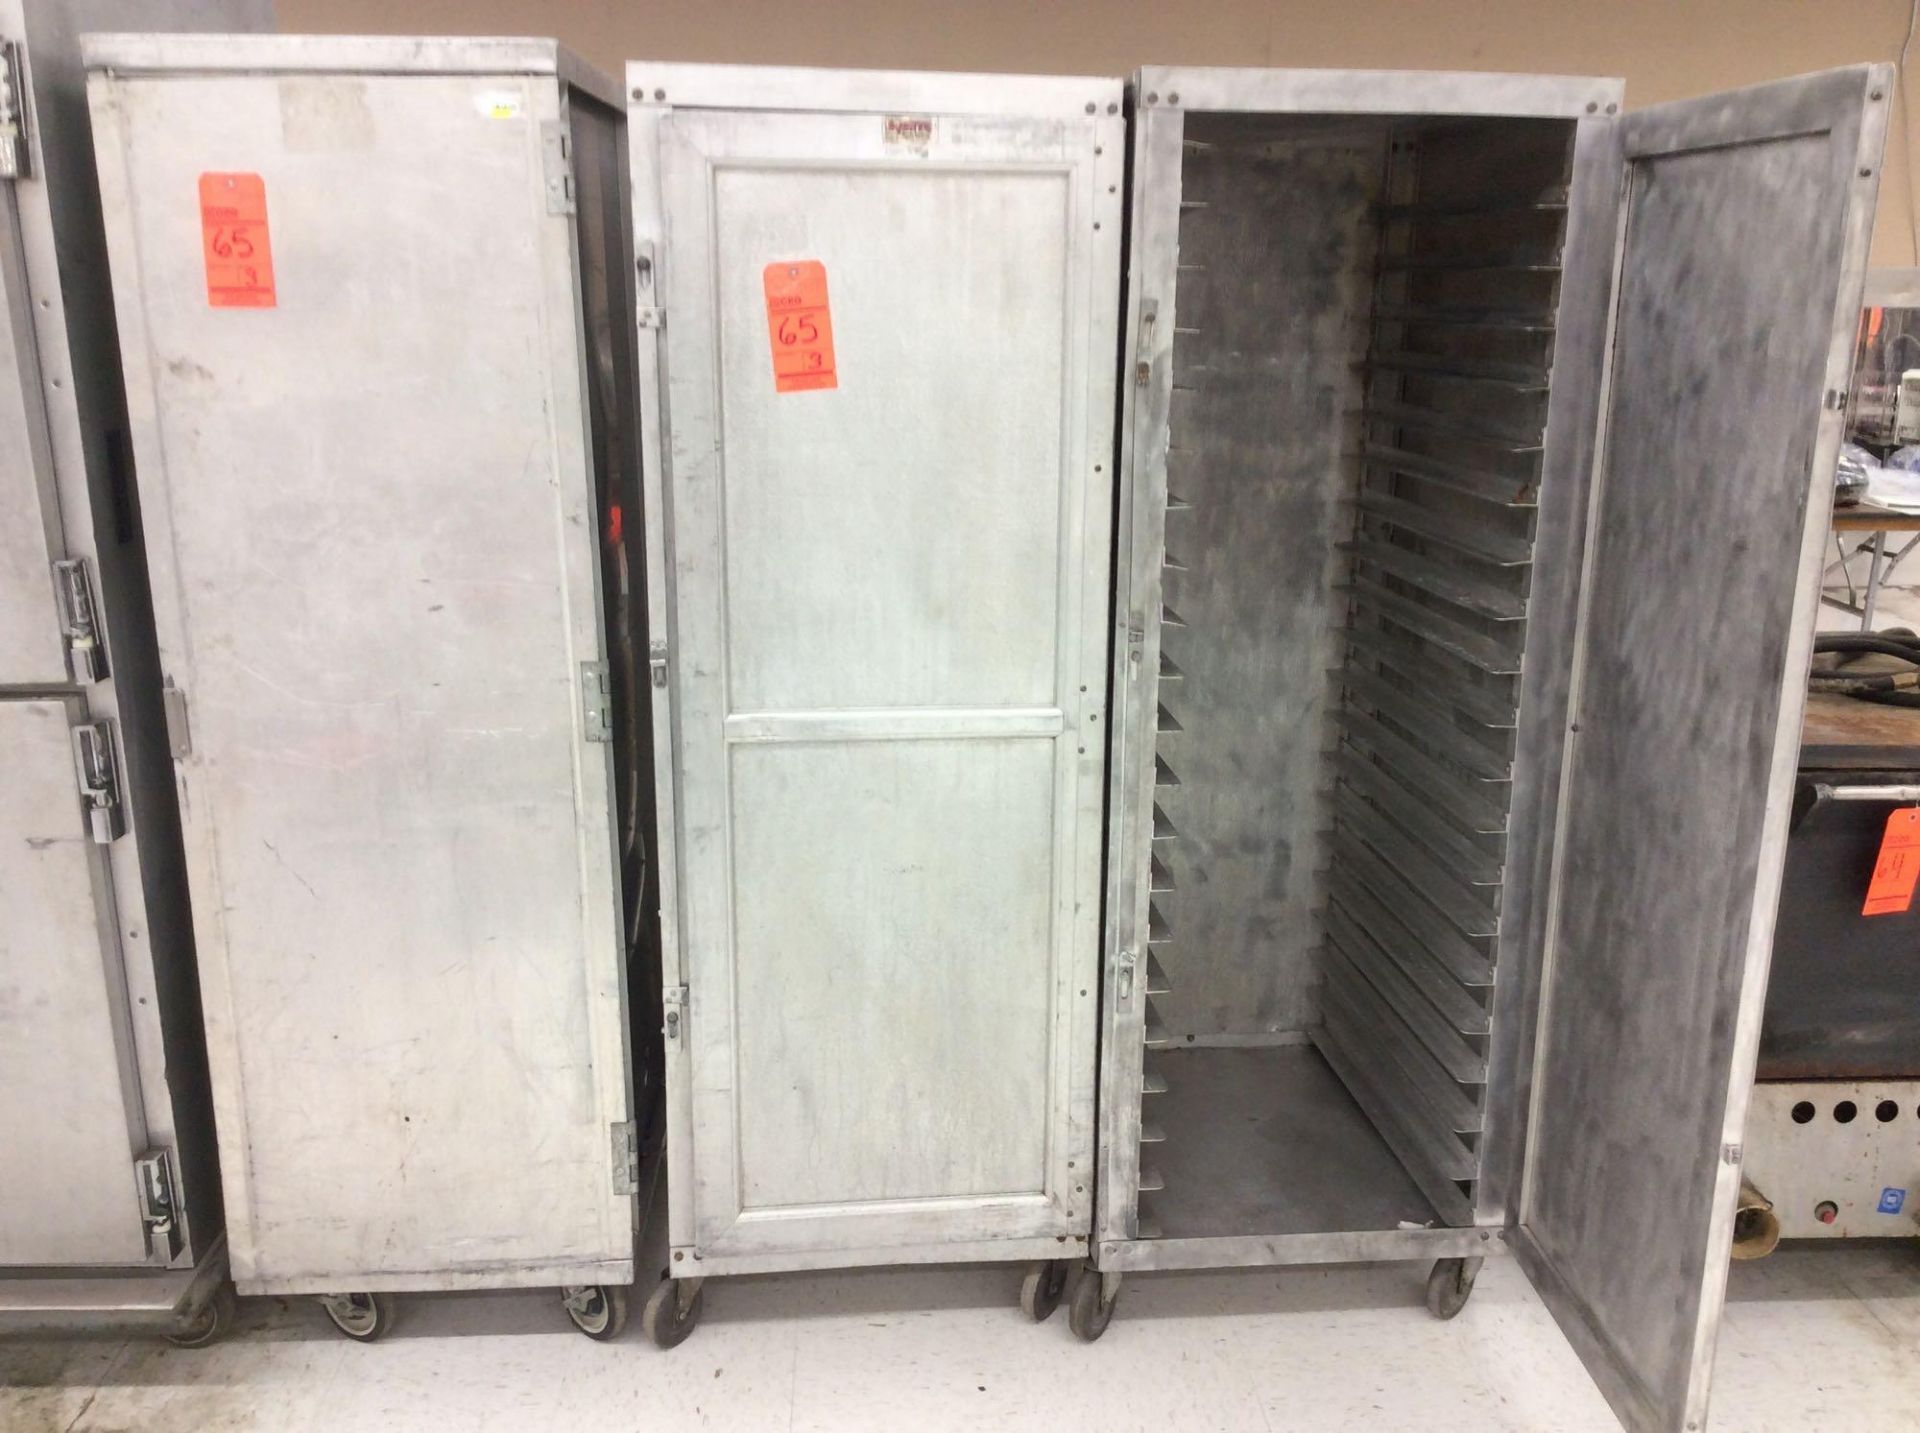 Lot of (3) portable aluminum food tray transports - (2) hold 20 trays each, one holds 40 trays